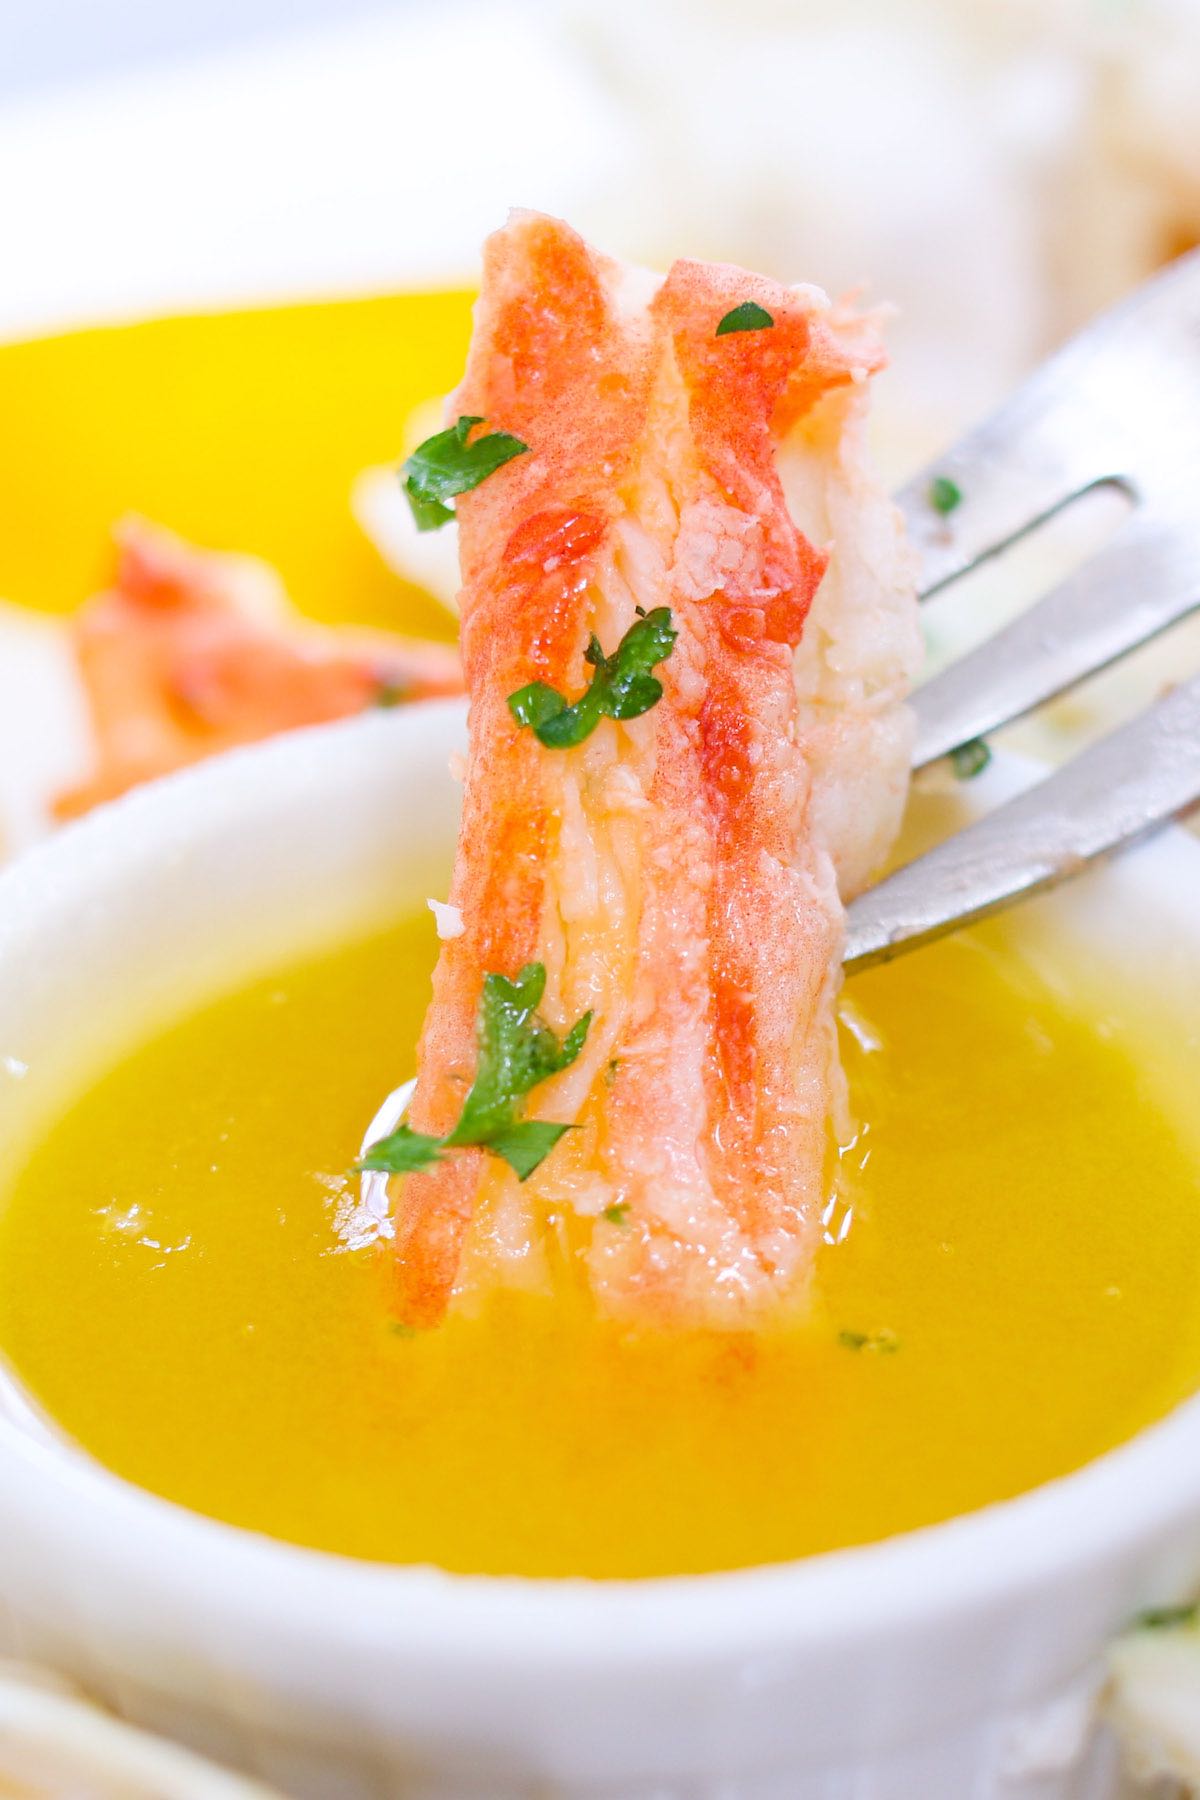 Dipping crab legs in clarified butter.